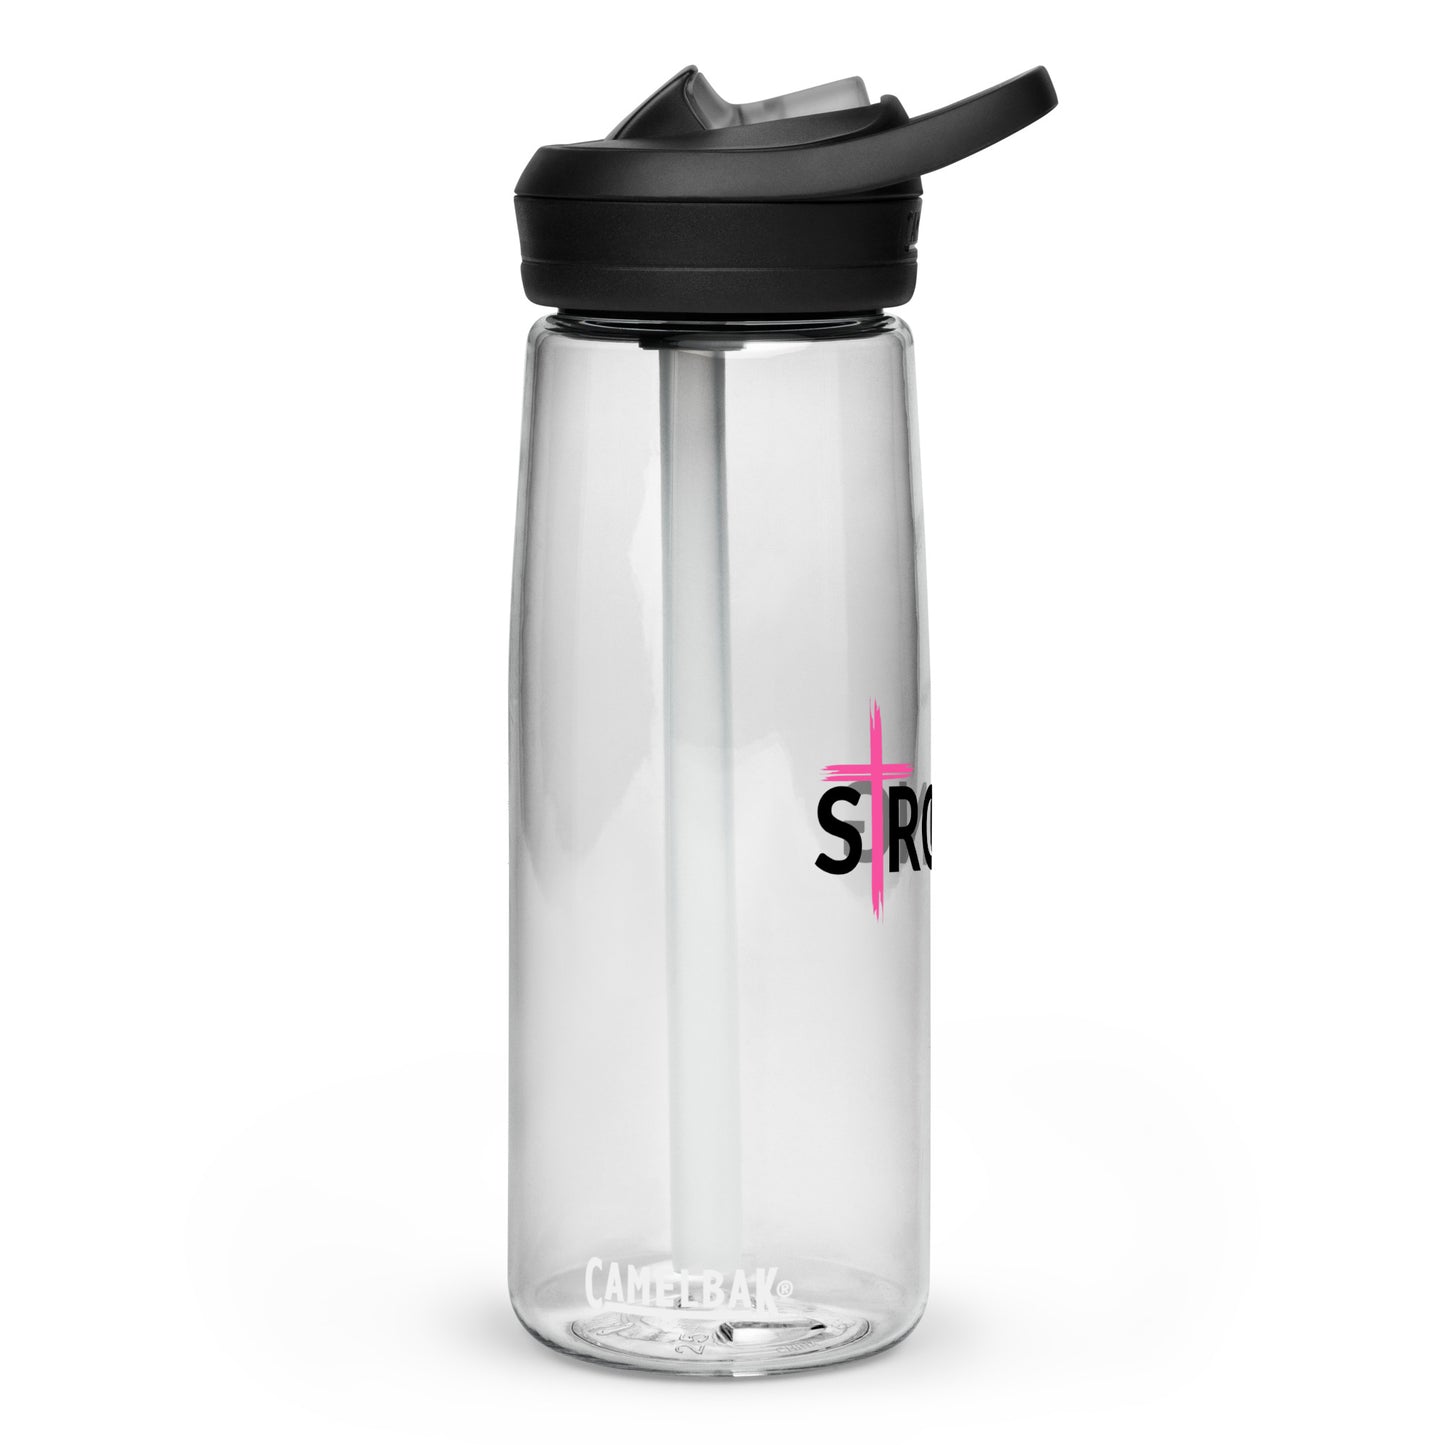 Strong sports water bottle